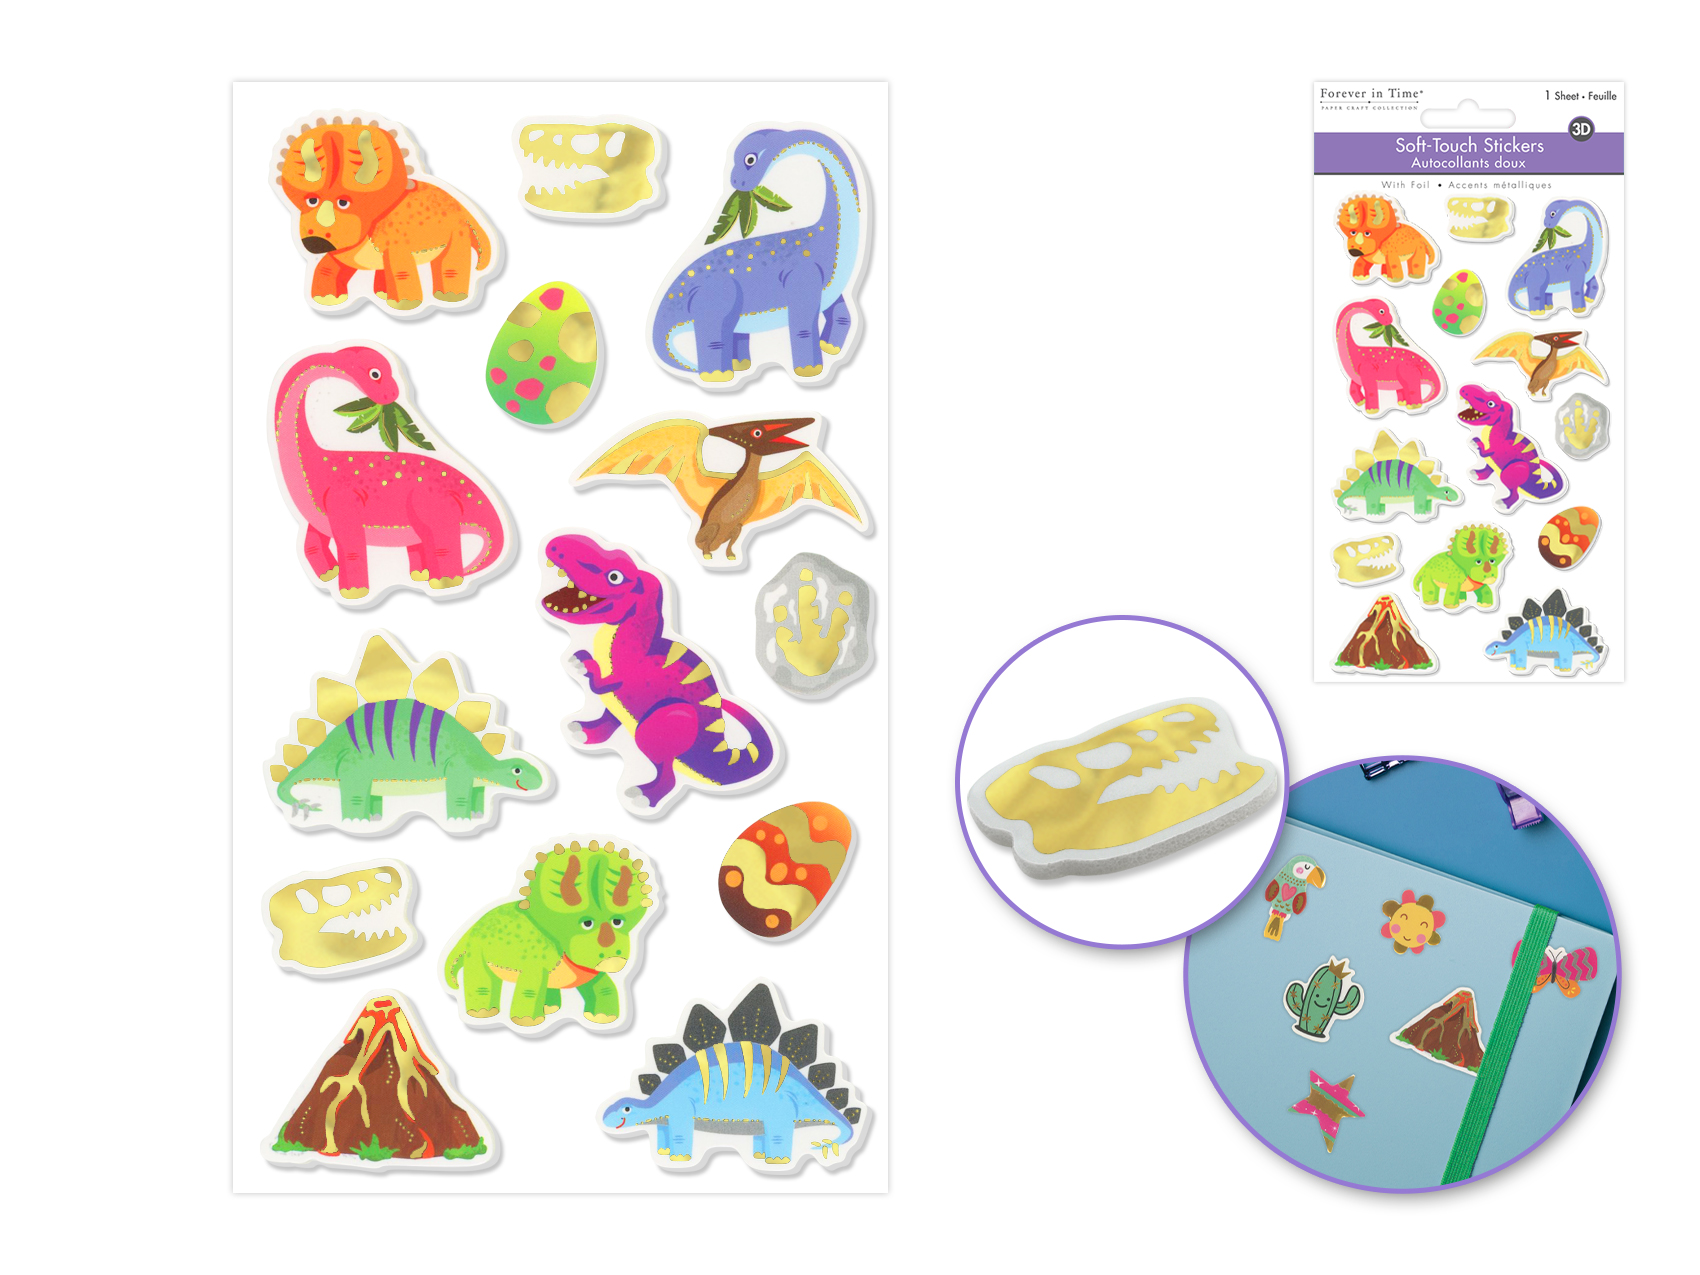 Forever In Time 3D Soft-Touch Stickers w/Foil - Dinosaur